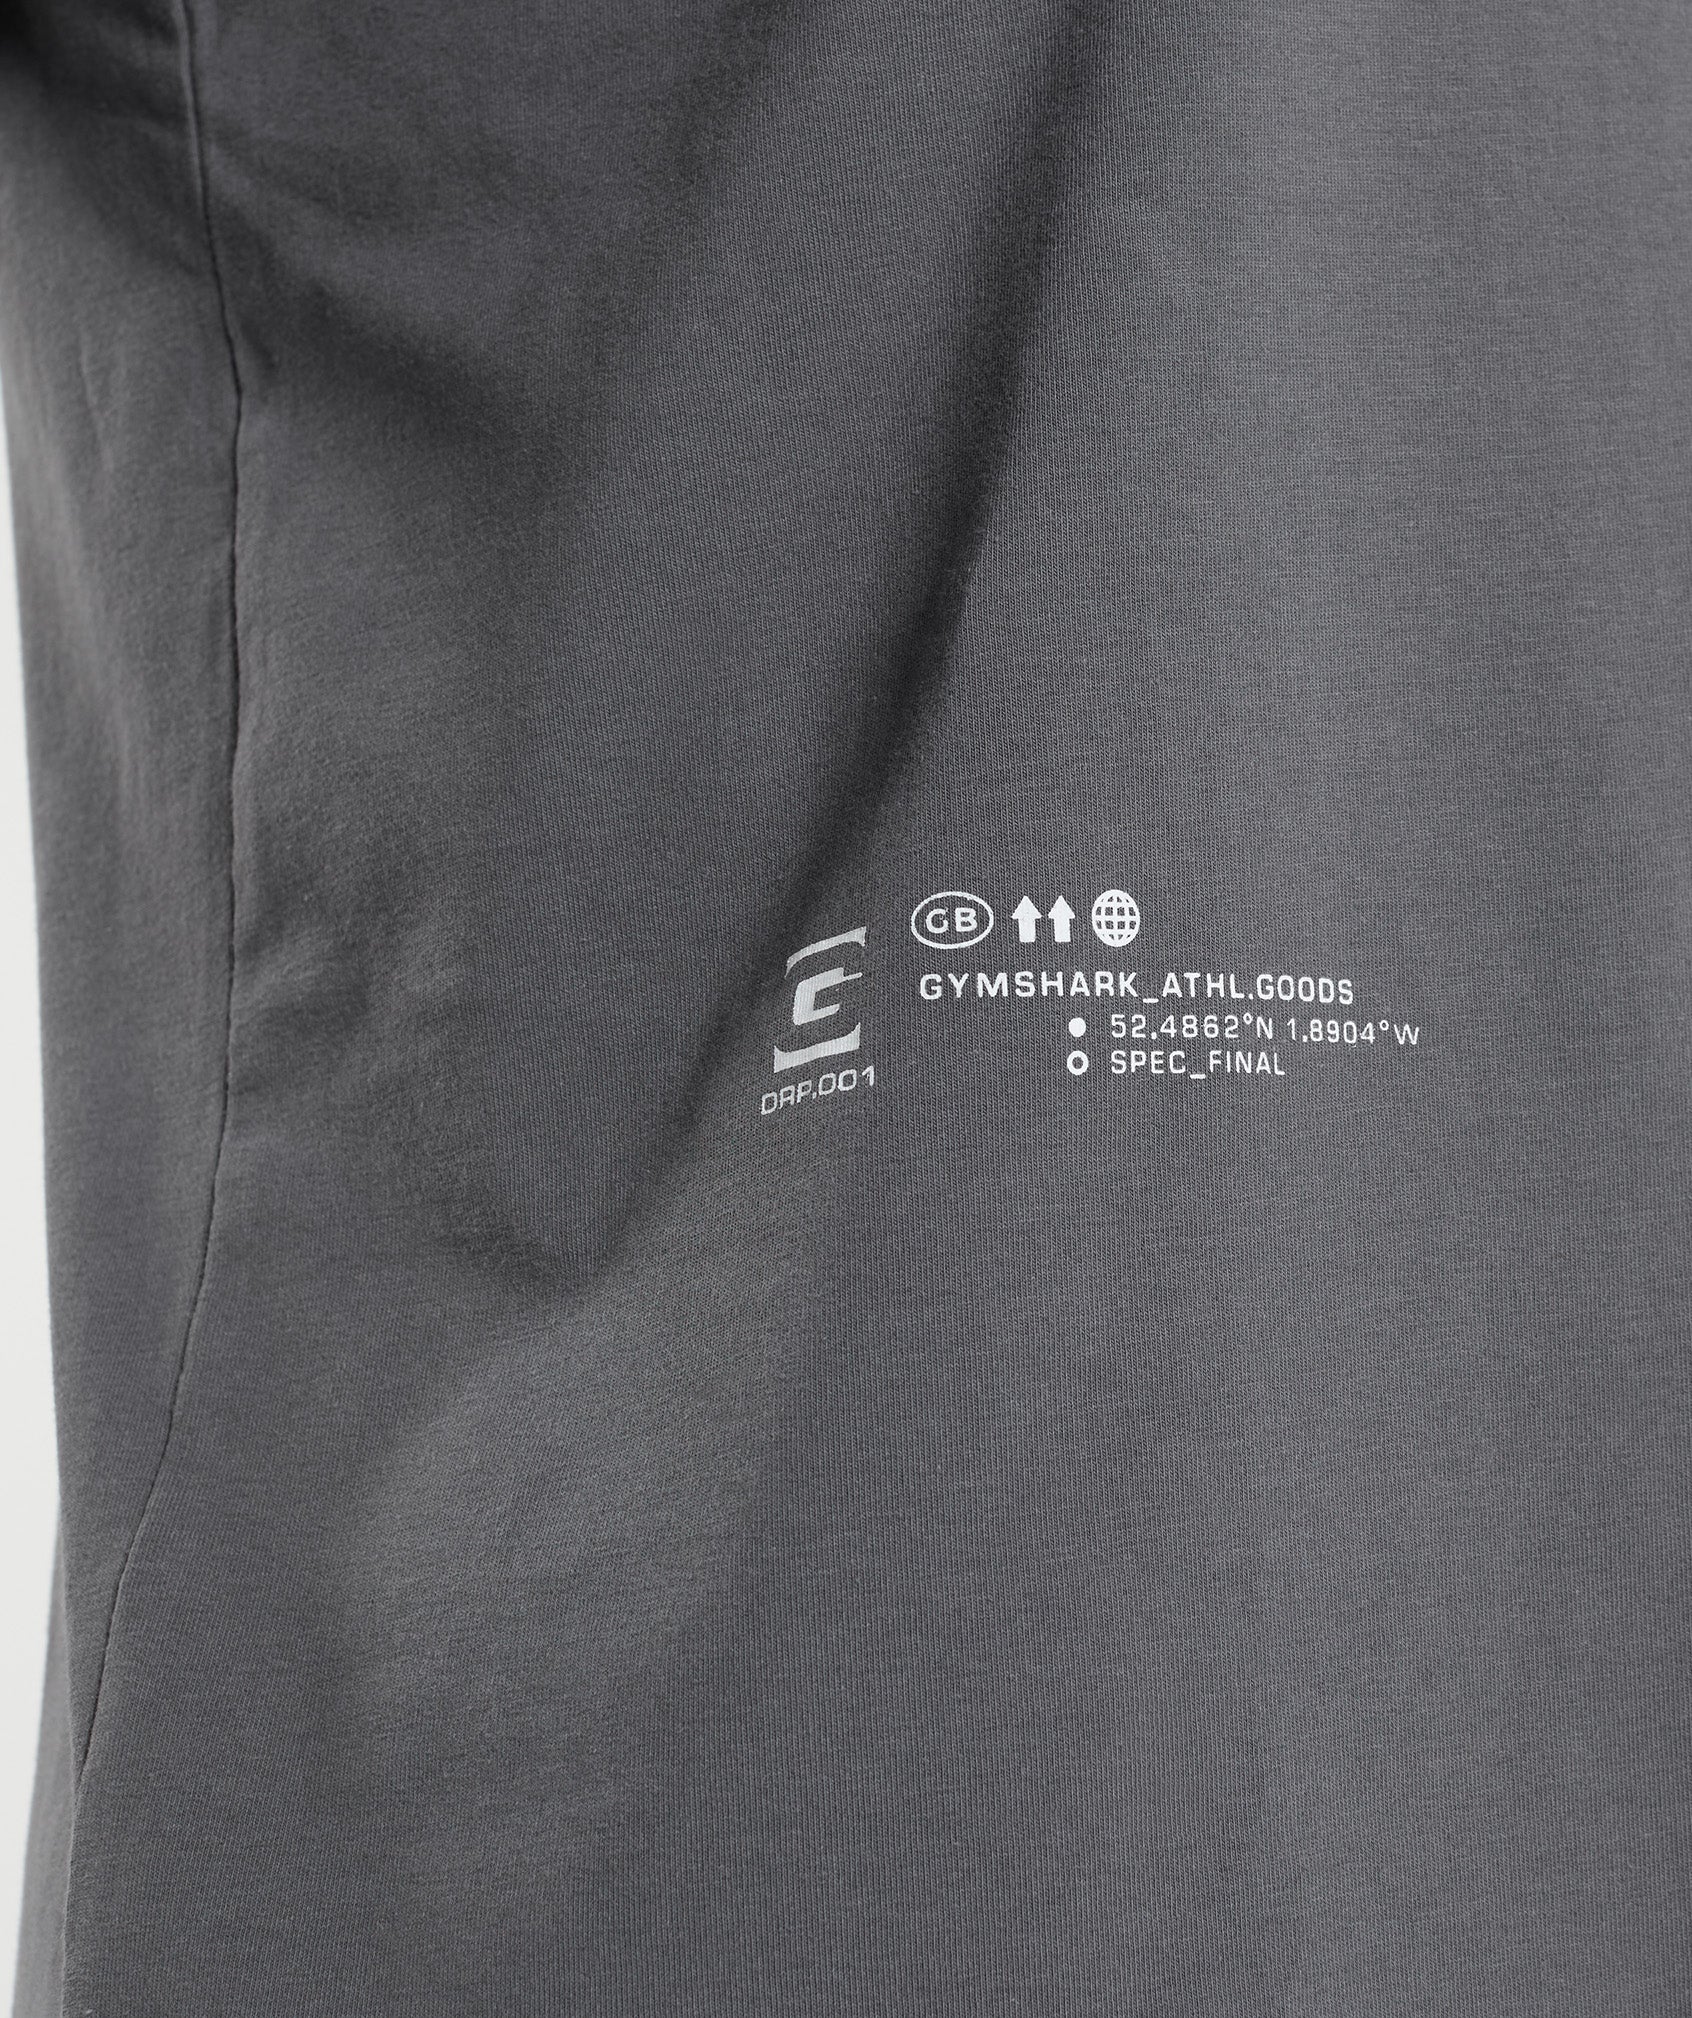 BHM T-Shirt in Silhouette Grey - view 3